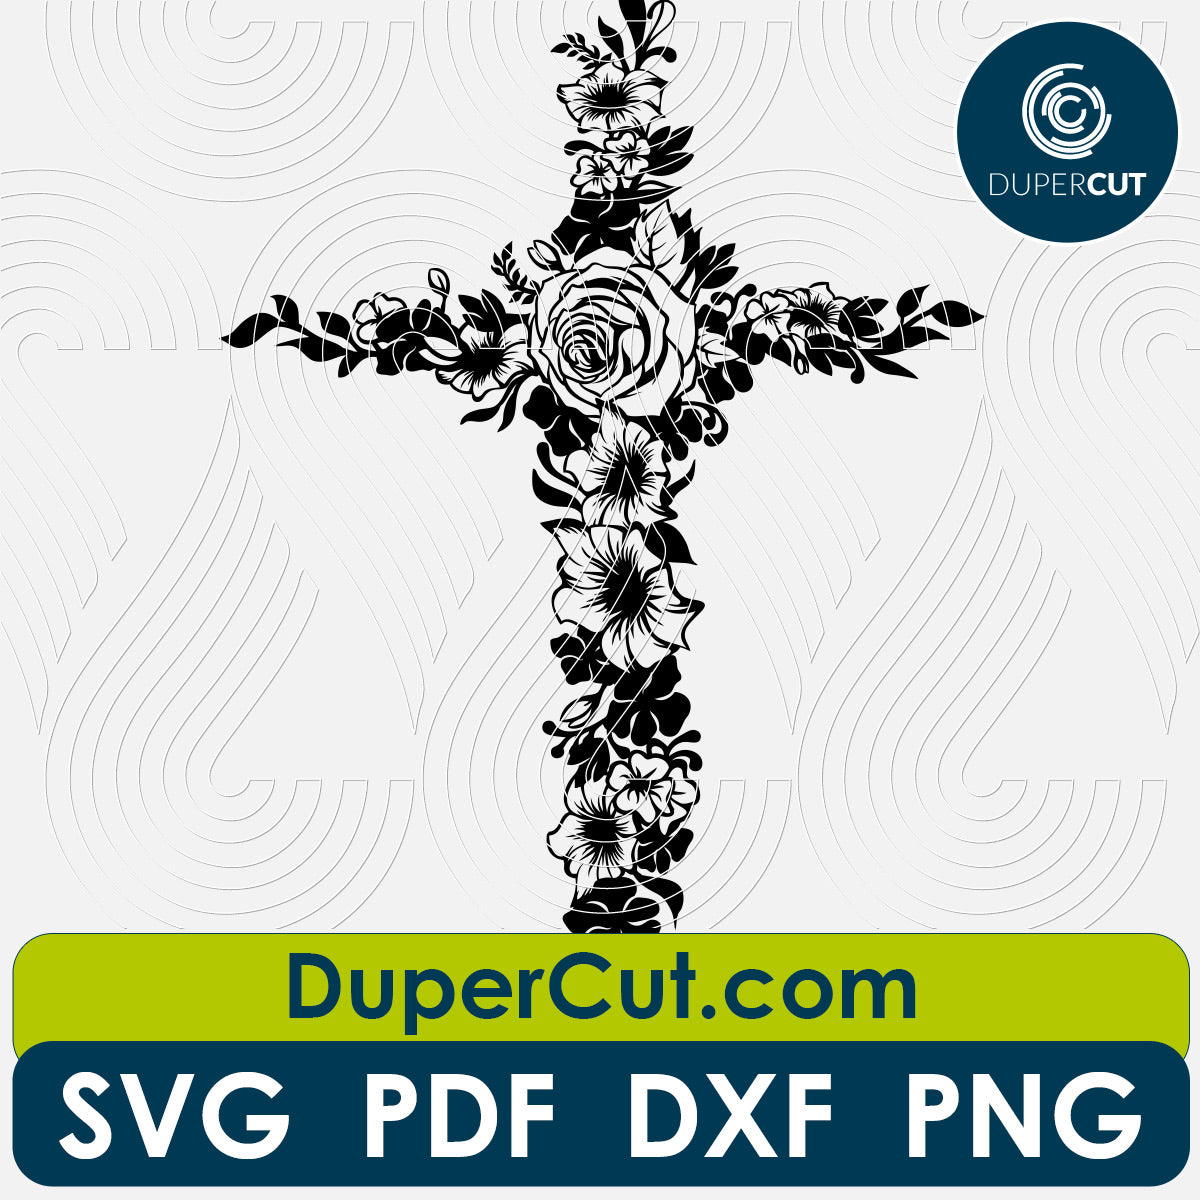 Floral Easter cross - SVG DXF vector files for laser cutting and engraving by DuperCut.com